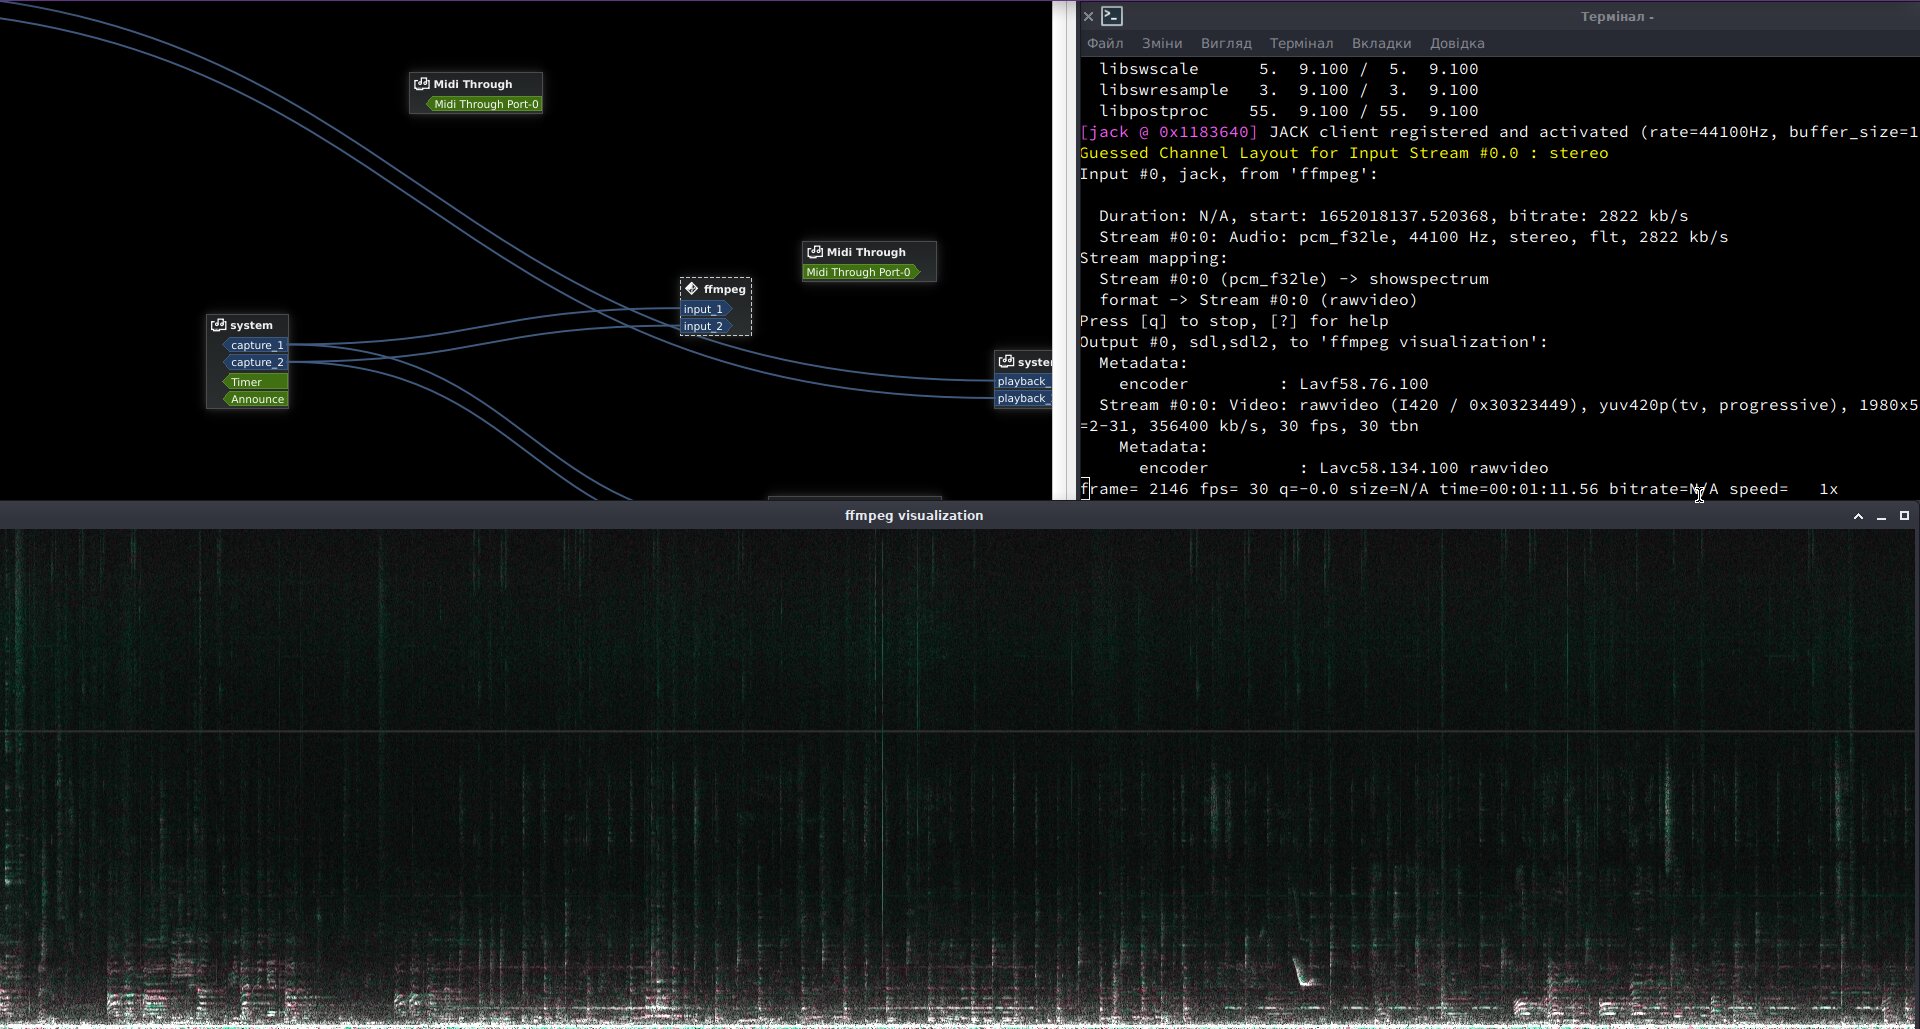 A screen shot displaying three windows: a wide window with spectrogram from ffmpeg, a jack patchbay window (Catia), connecting system ports to ffmpeg, and a terminal window showing the output of ffmpeg.